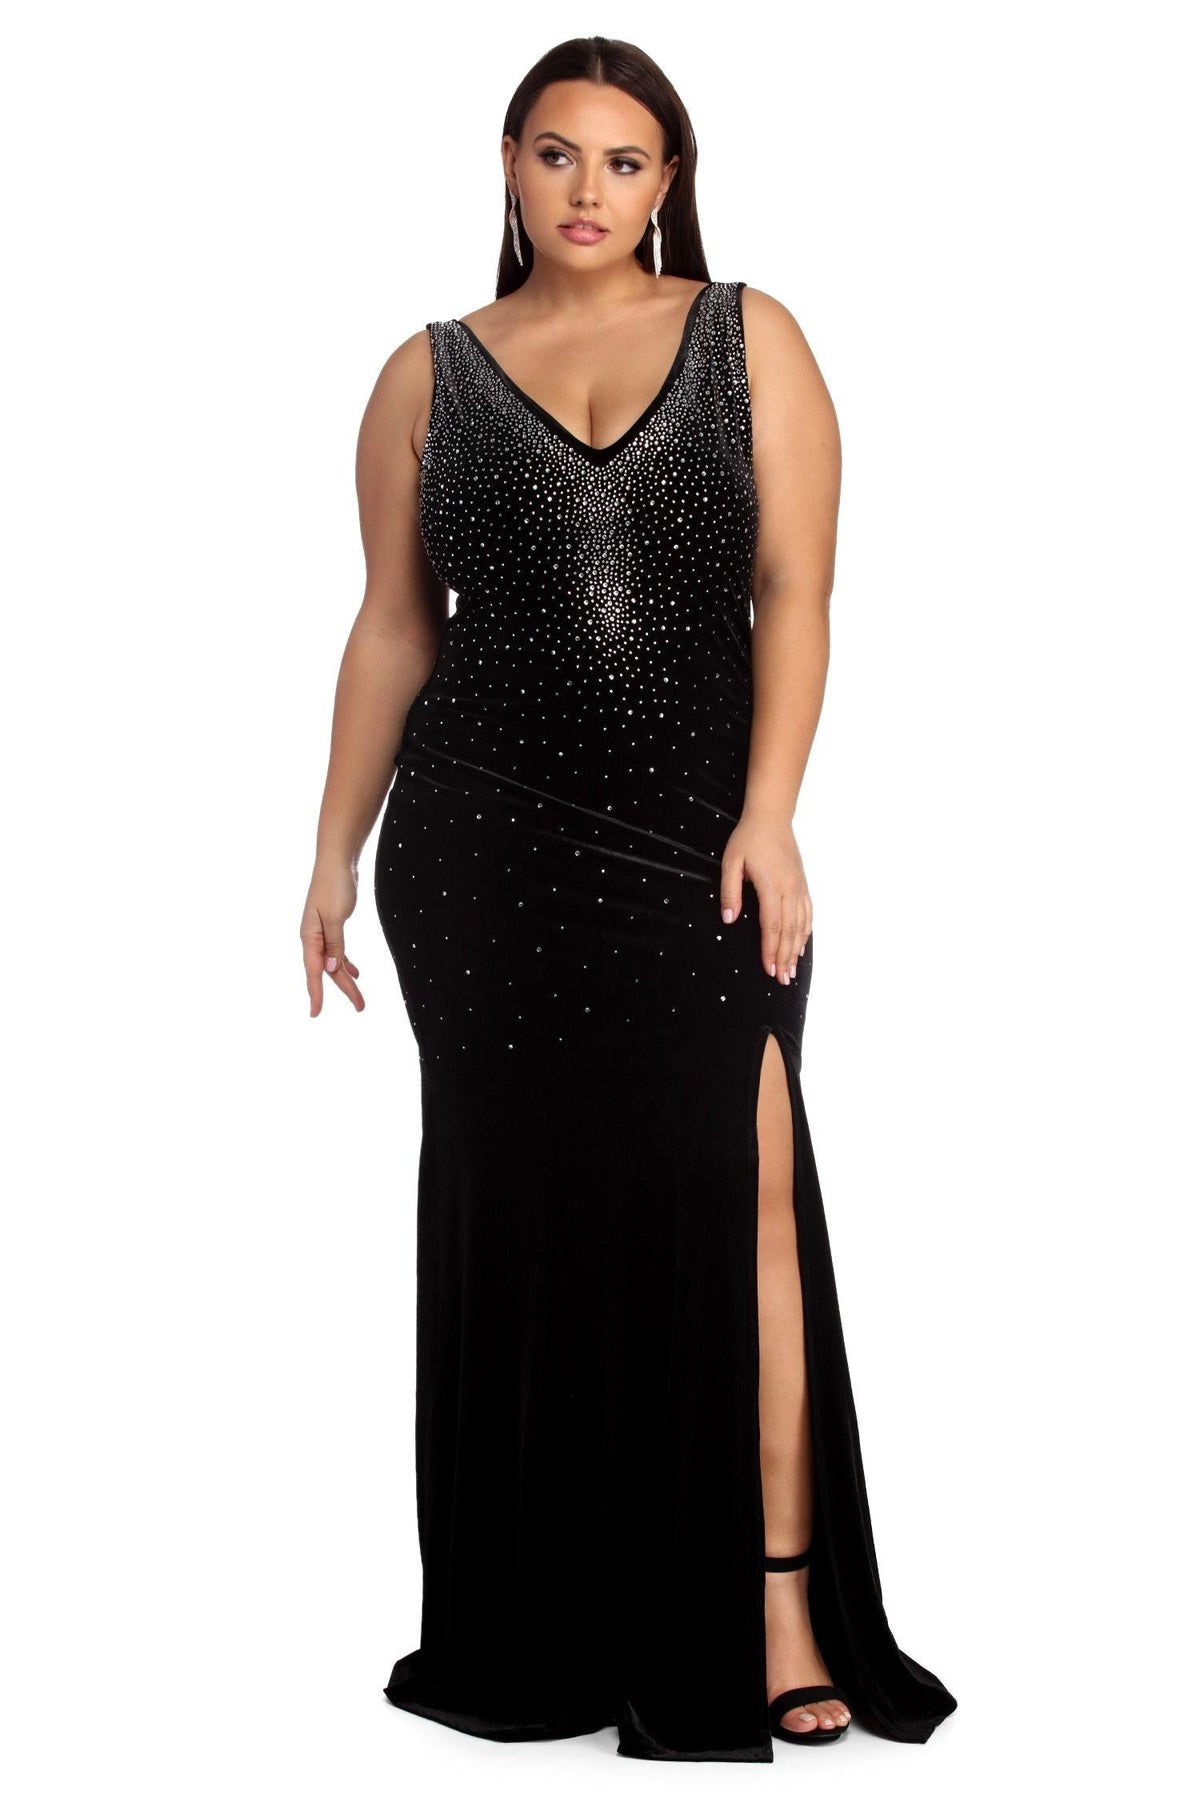 Plus Leanna Formal Heat Stone Dress – Lady Occasions